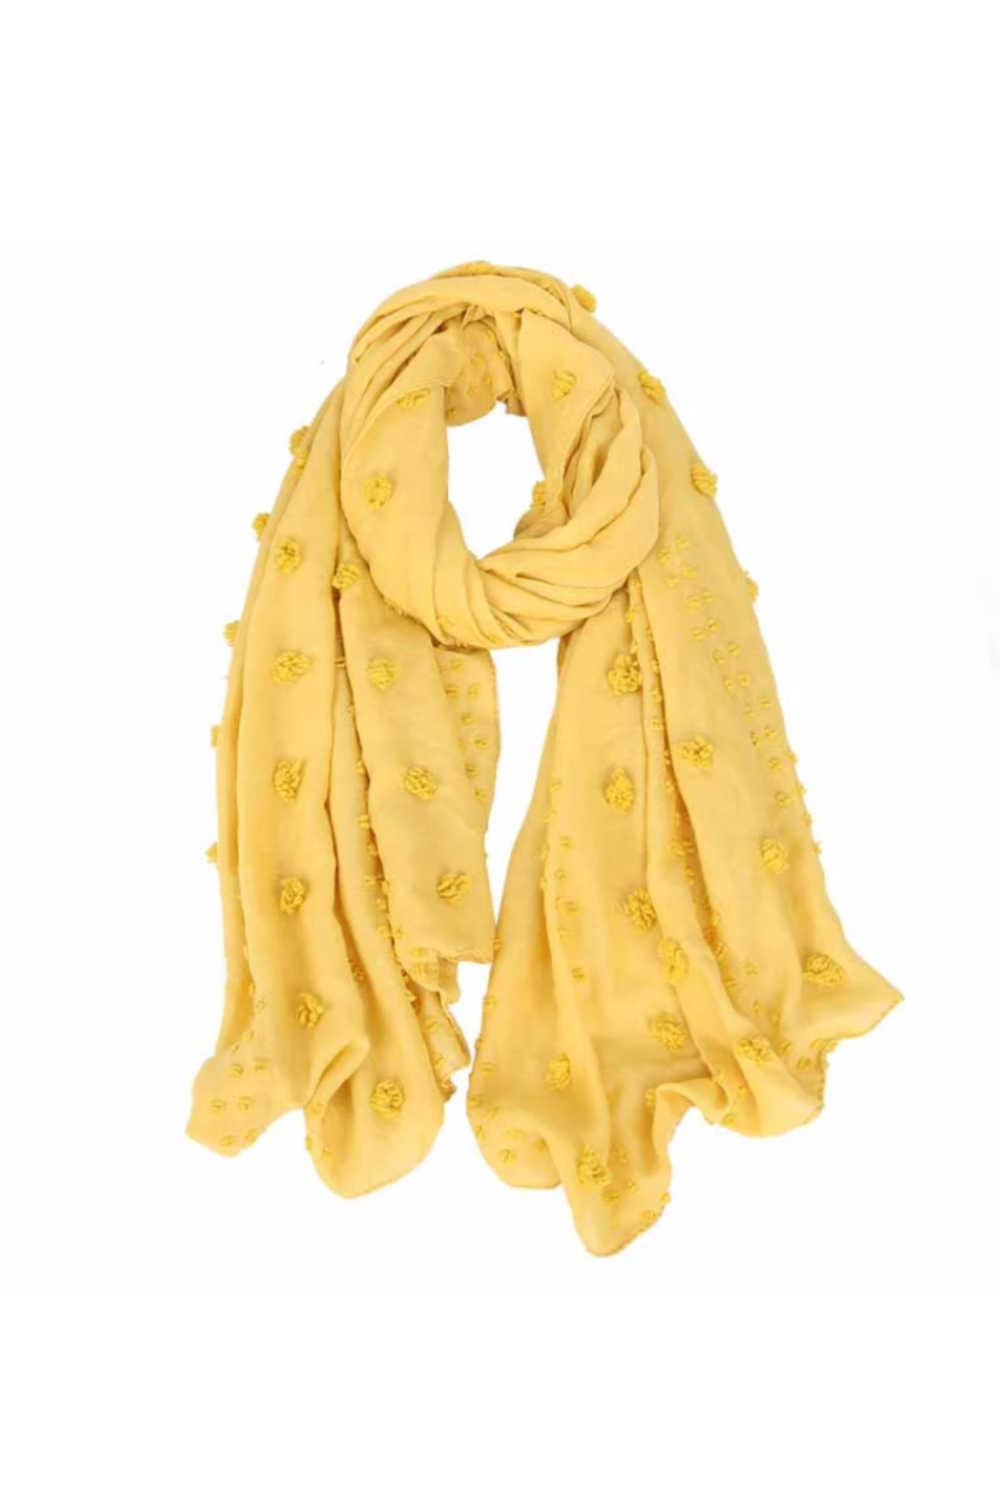 scarf-yellow-large-size